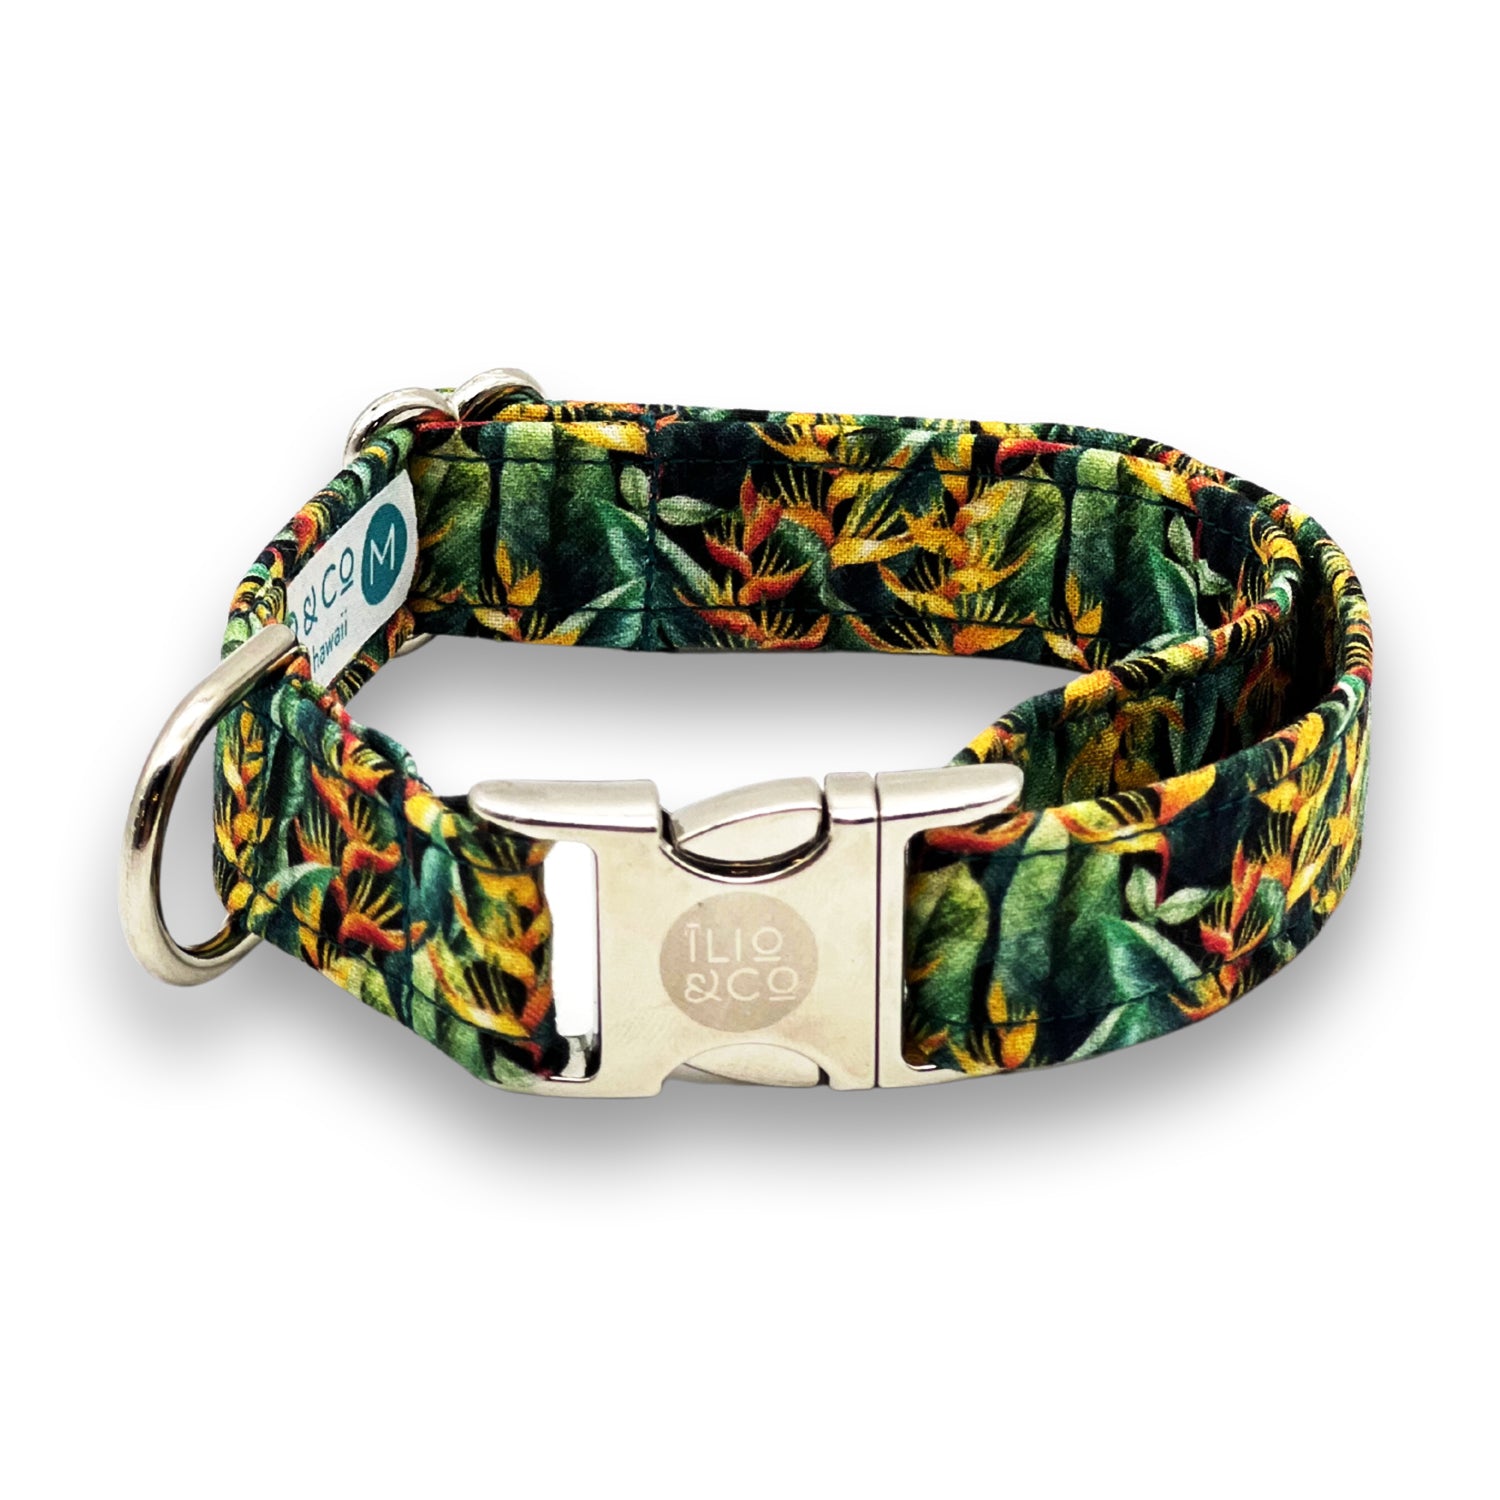 Pop-Up Mākeke - Ilio & Co. - Heliconia Dog Collar - Front View